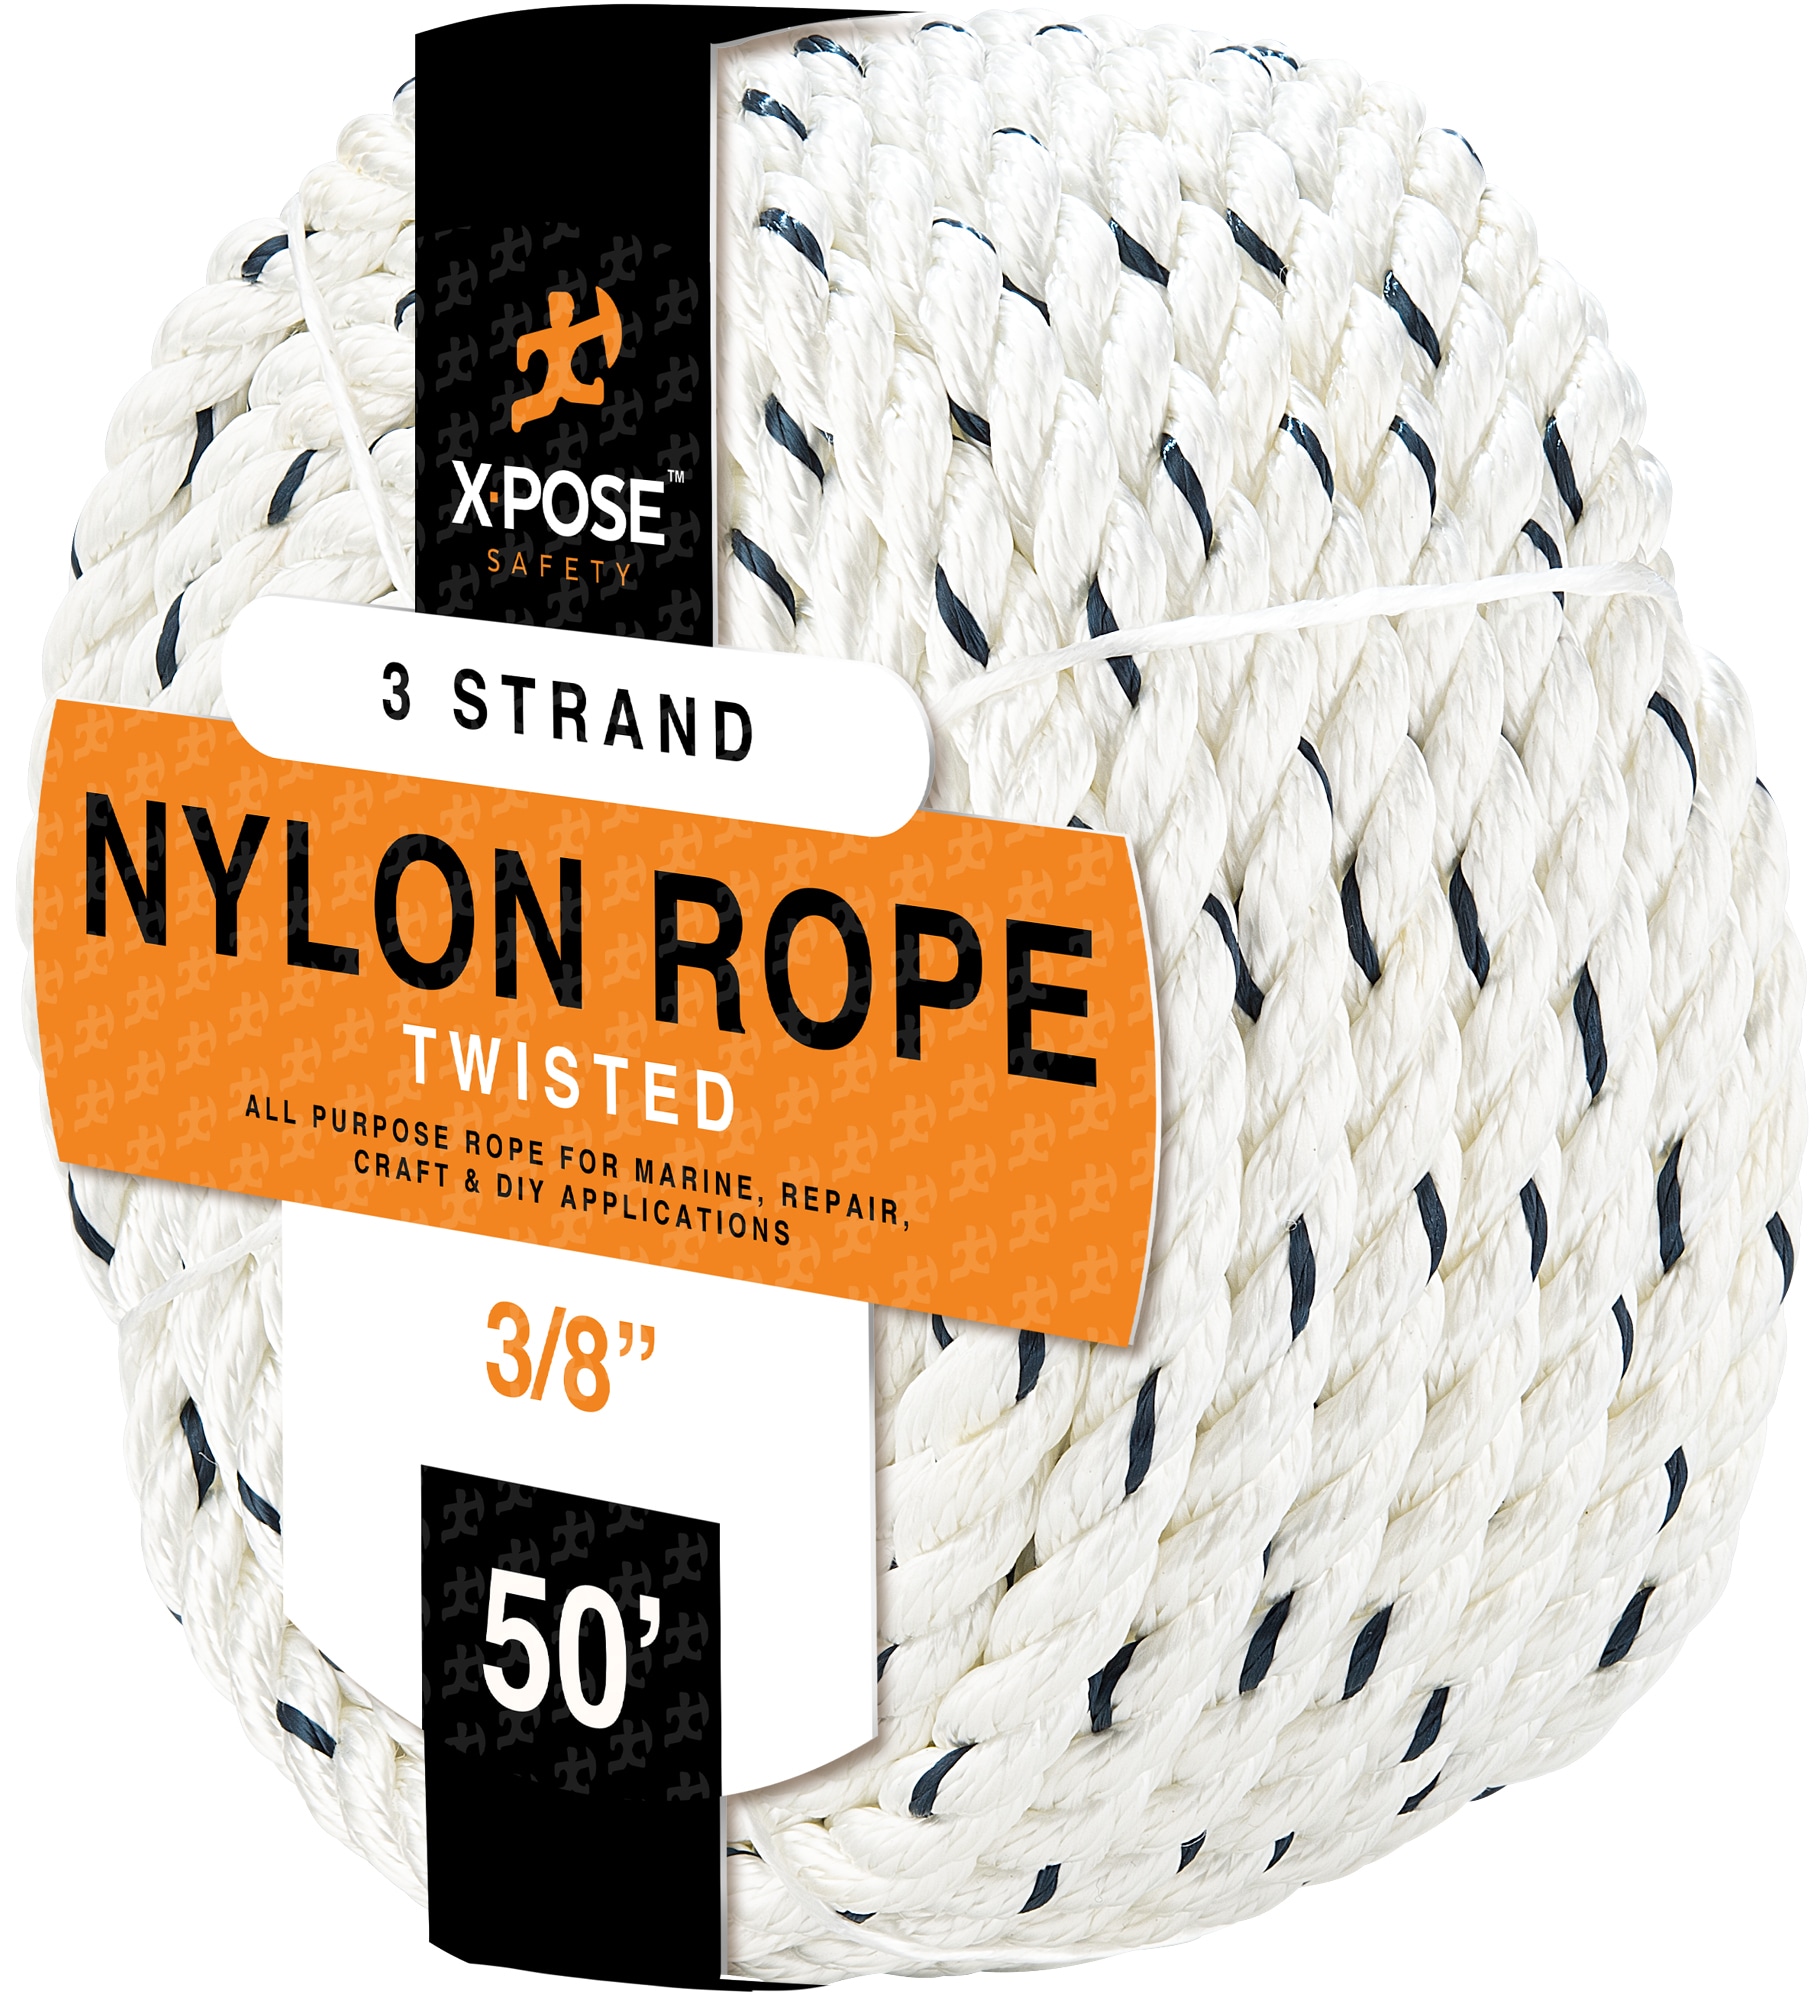 XPOSE SAFETY Nylon Poly Rope - 3/8 Inch Polyester and Nylon Rope 50 Ft - Up  to 10x Stronger Compared Natural Fiber or Polypropylene Rope - Synthetic 3  Strand Braided Rope 